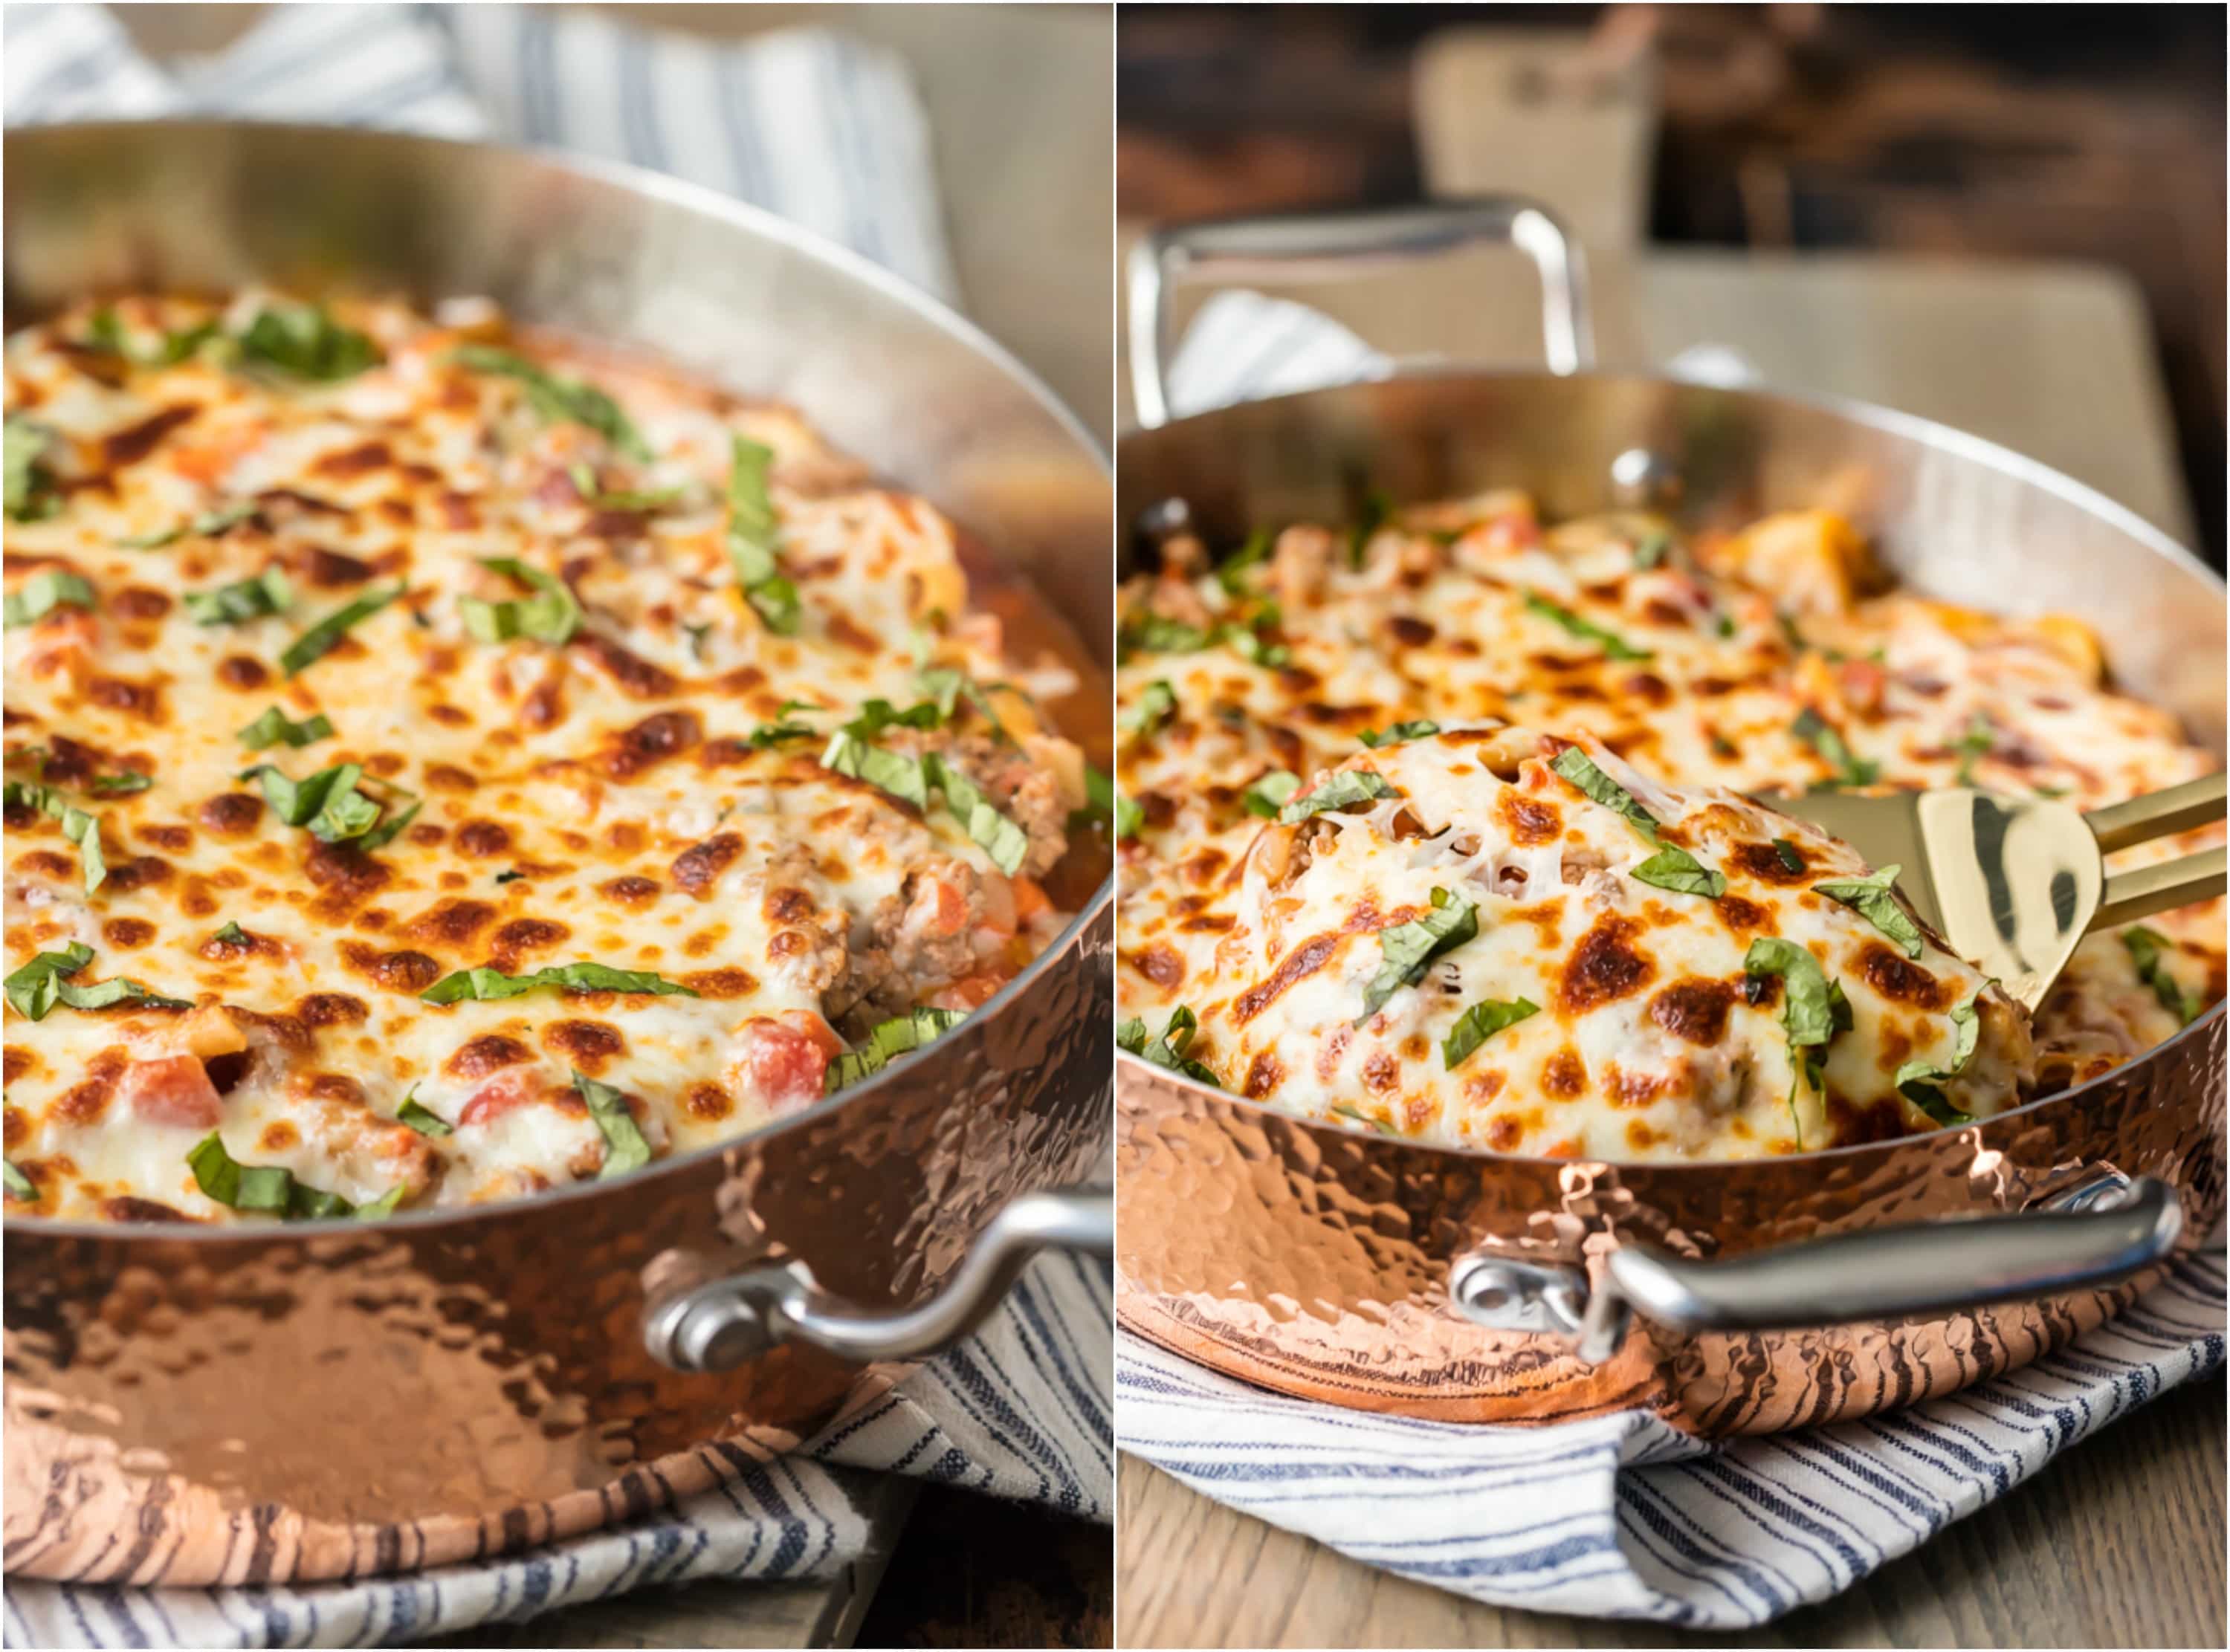 Can you believe this Skinny Cheat's Lasagna is only 8 Weight Watchers Points? It's secretly thickened up with extra vegetables like carrots, zucchini, and celery, making it the perfect healthy comfort food. You'll still feel like you're indulging, without the guilt. We LOVE this recipe!